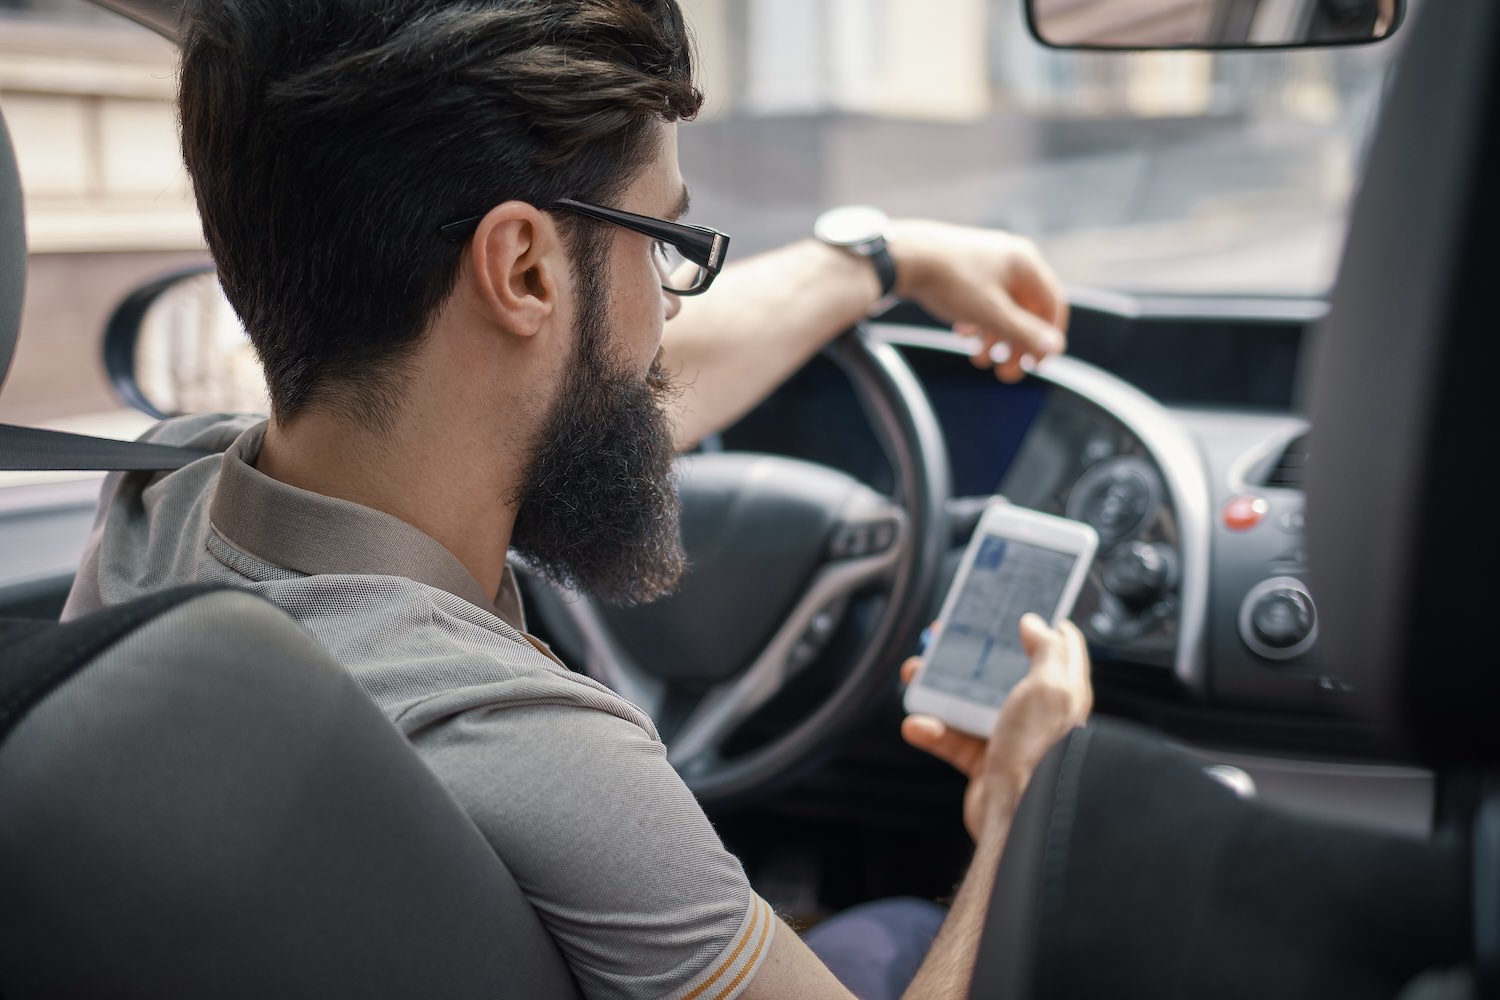 using mobile phone while driving